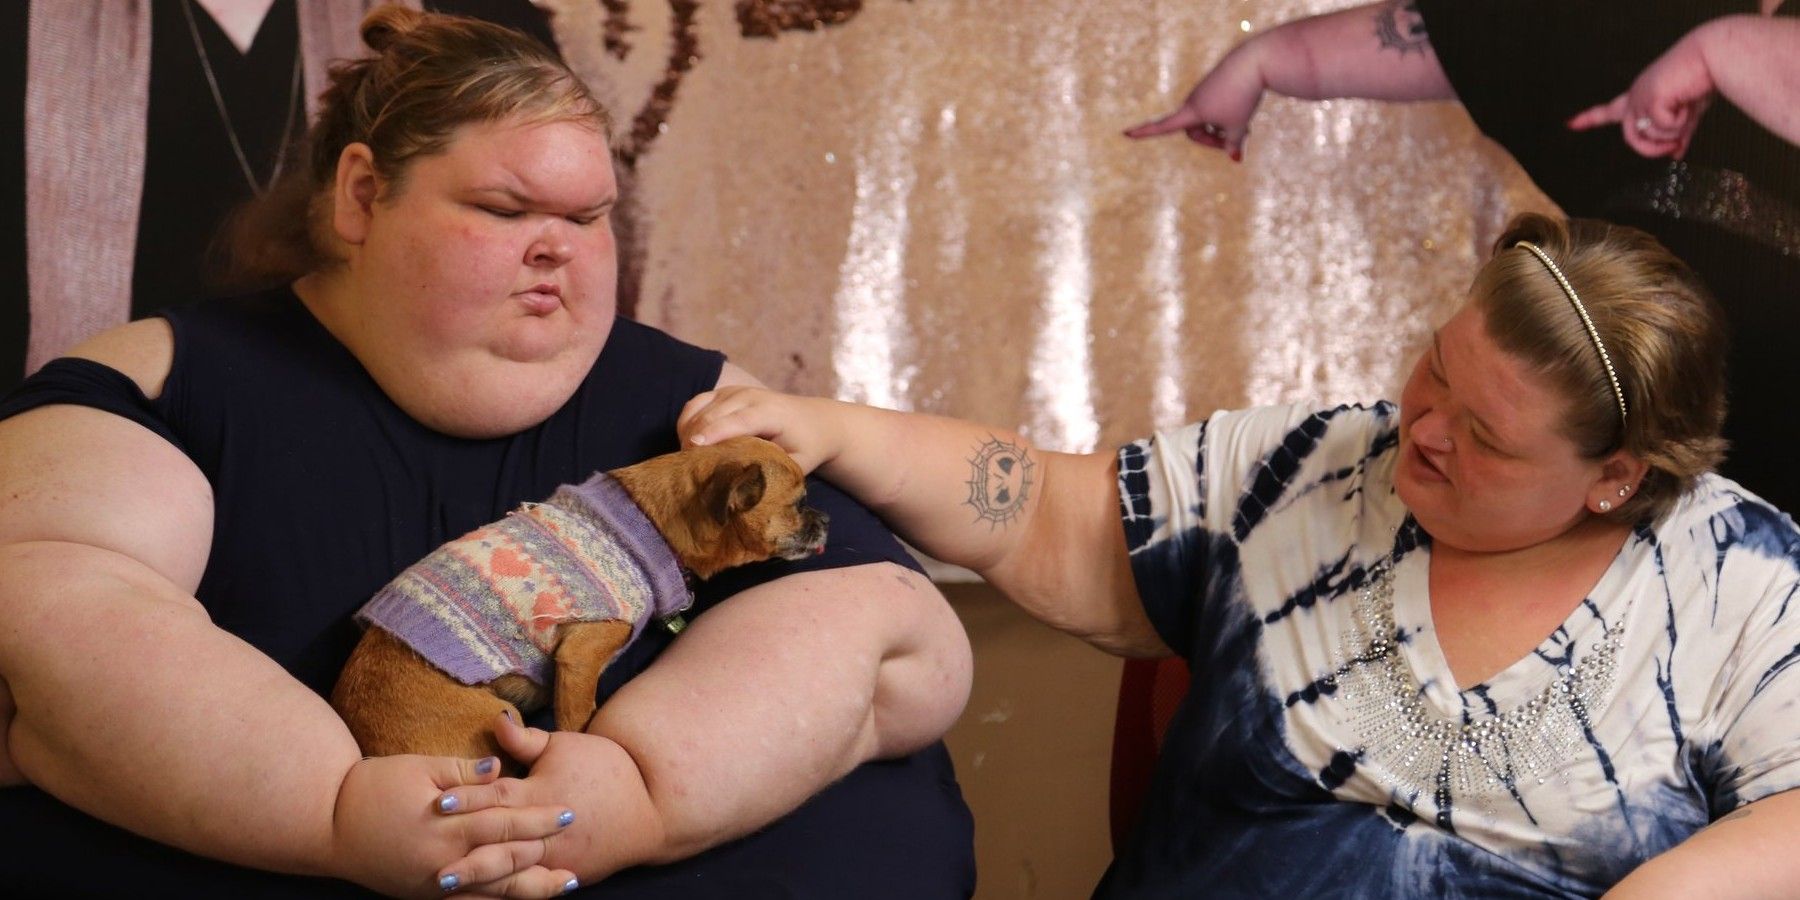 Amy Slaton and Tammy Slaton with a dog in 1000-lb Sisters